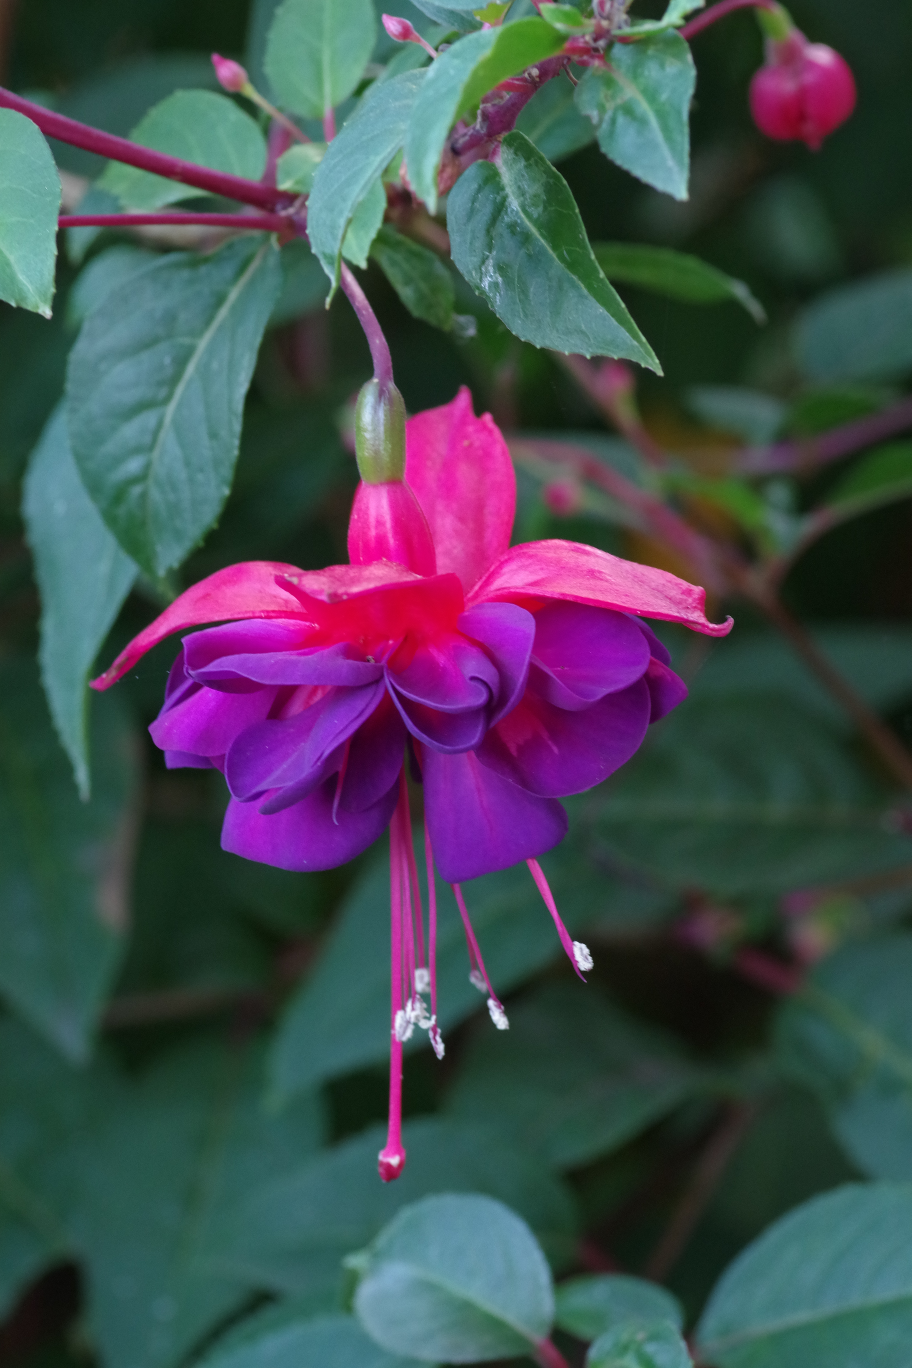 Late fuchsia at end of September